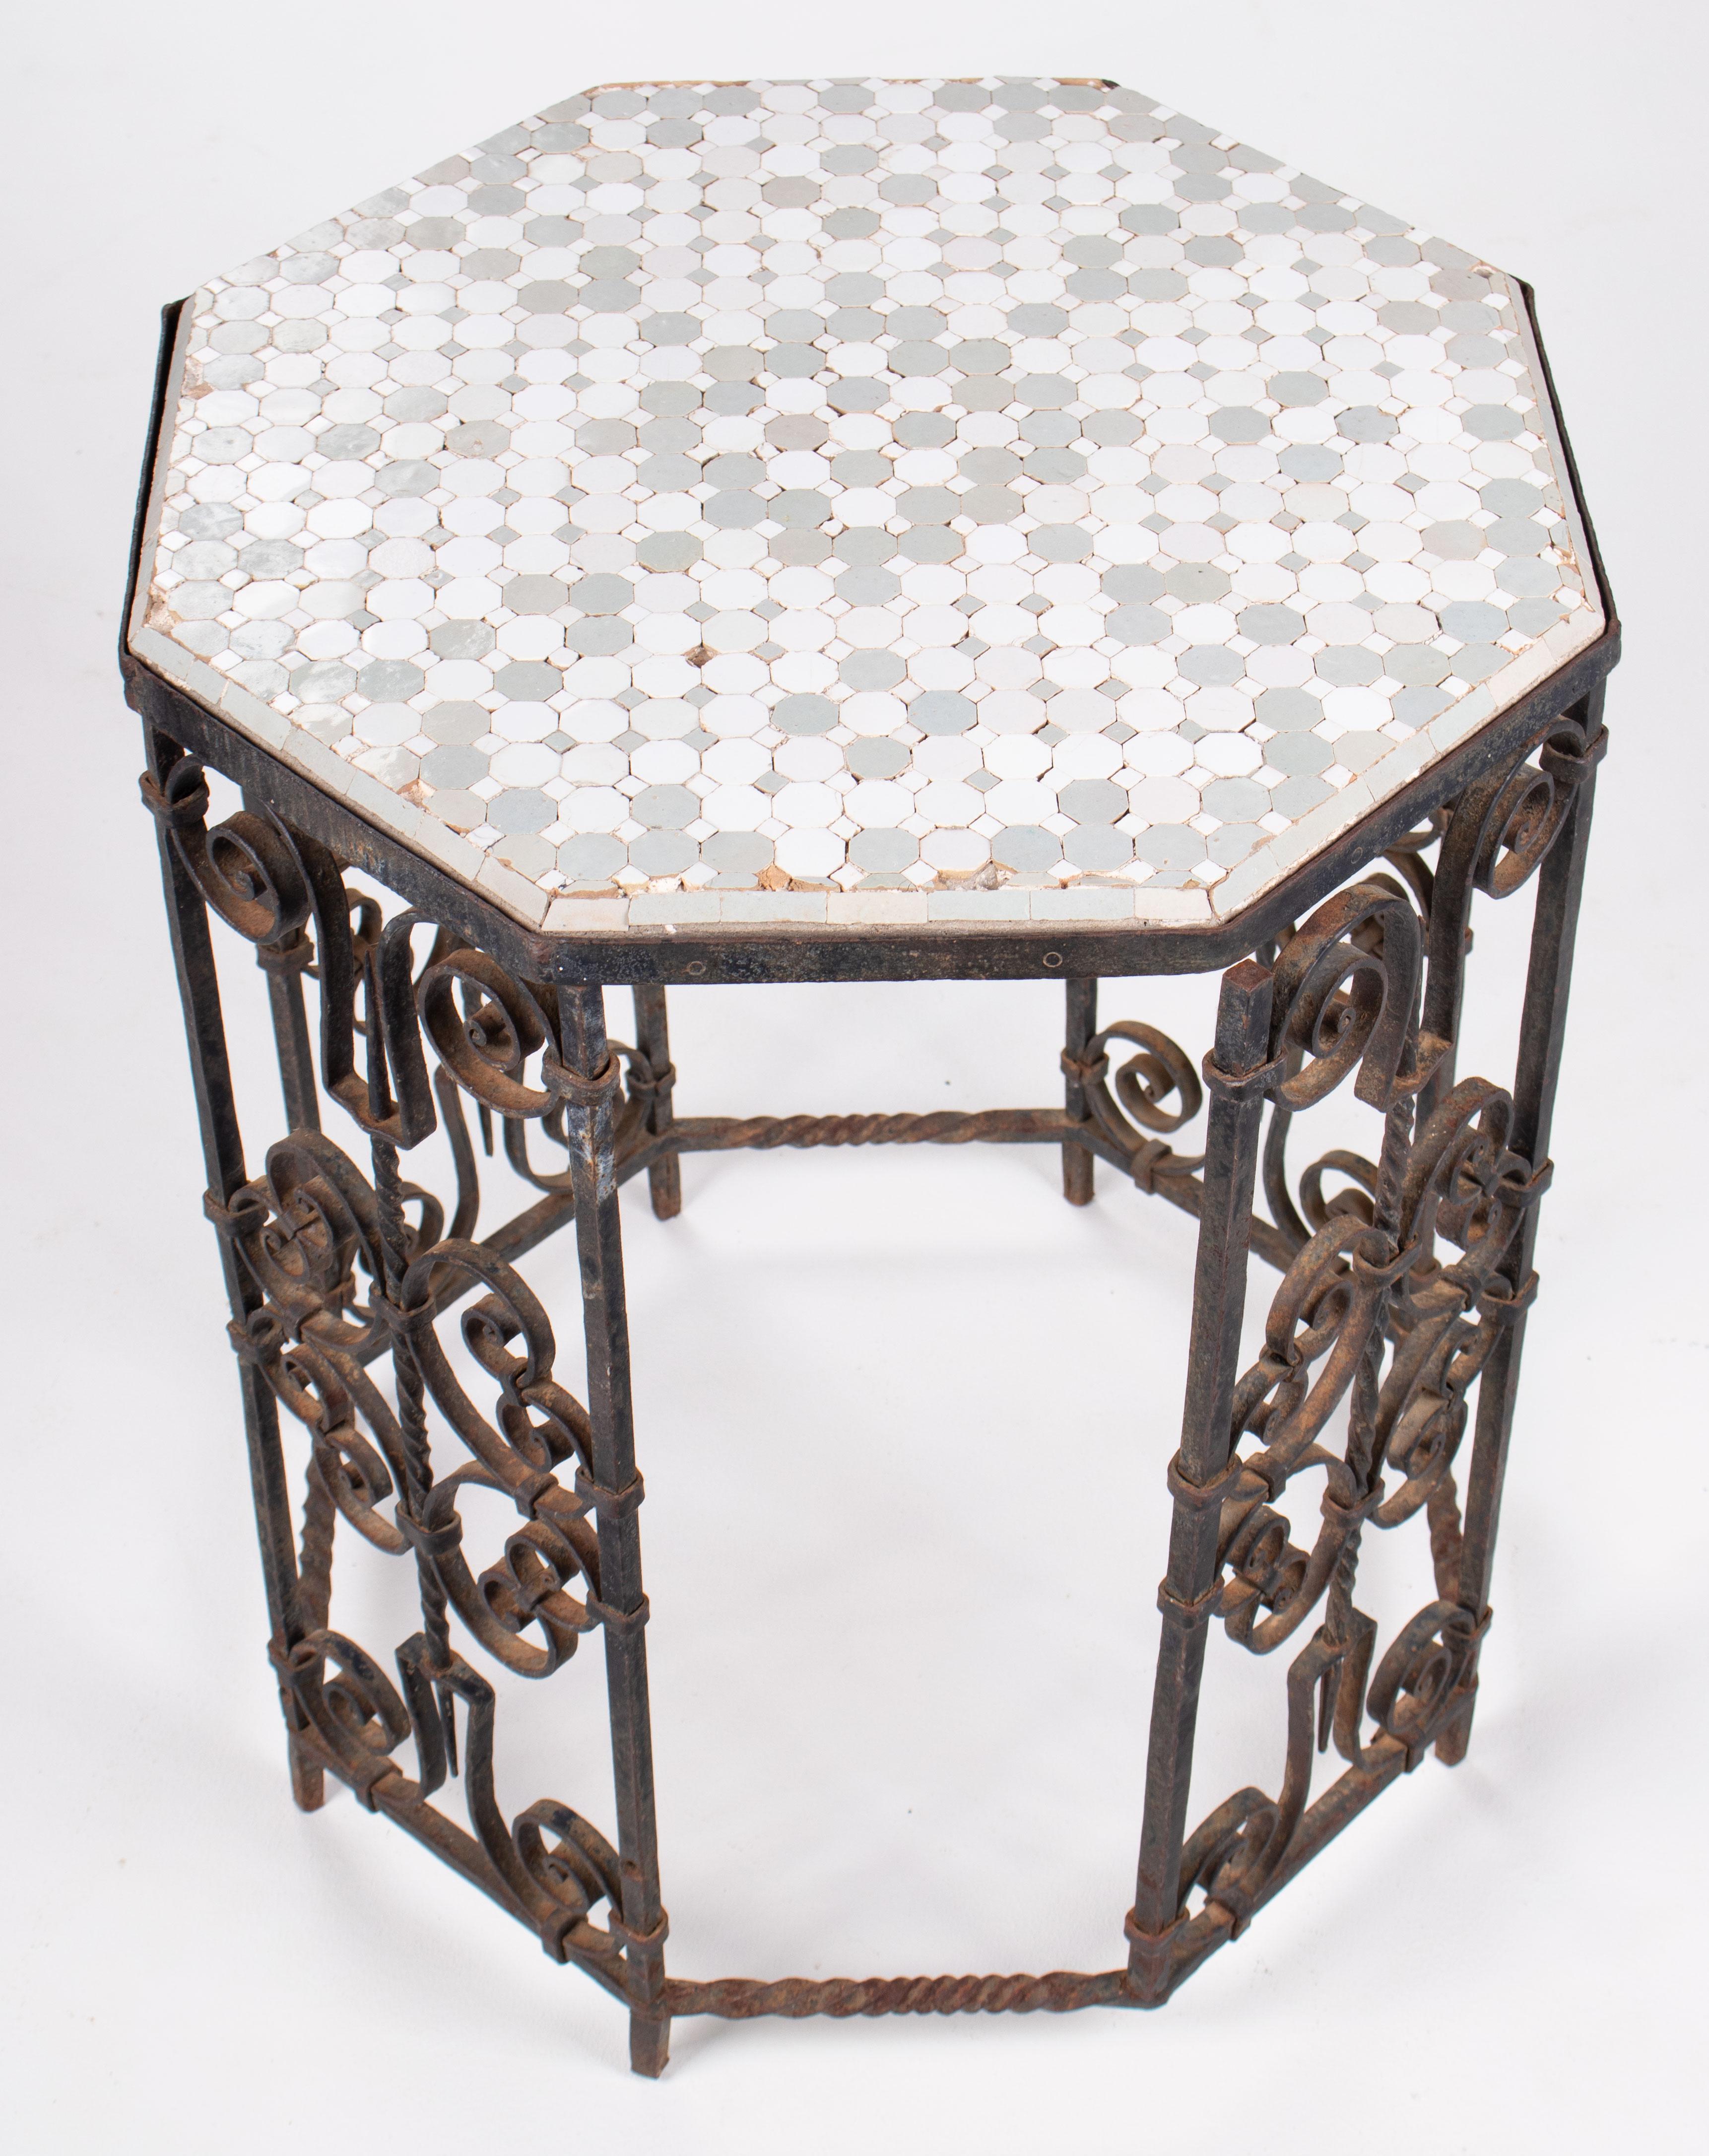 19th Century French Wrought Iron Octagonal Ceramic Top Table 1